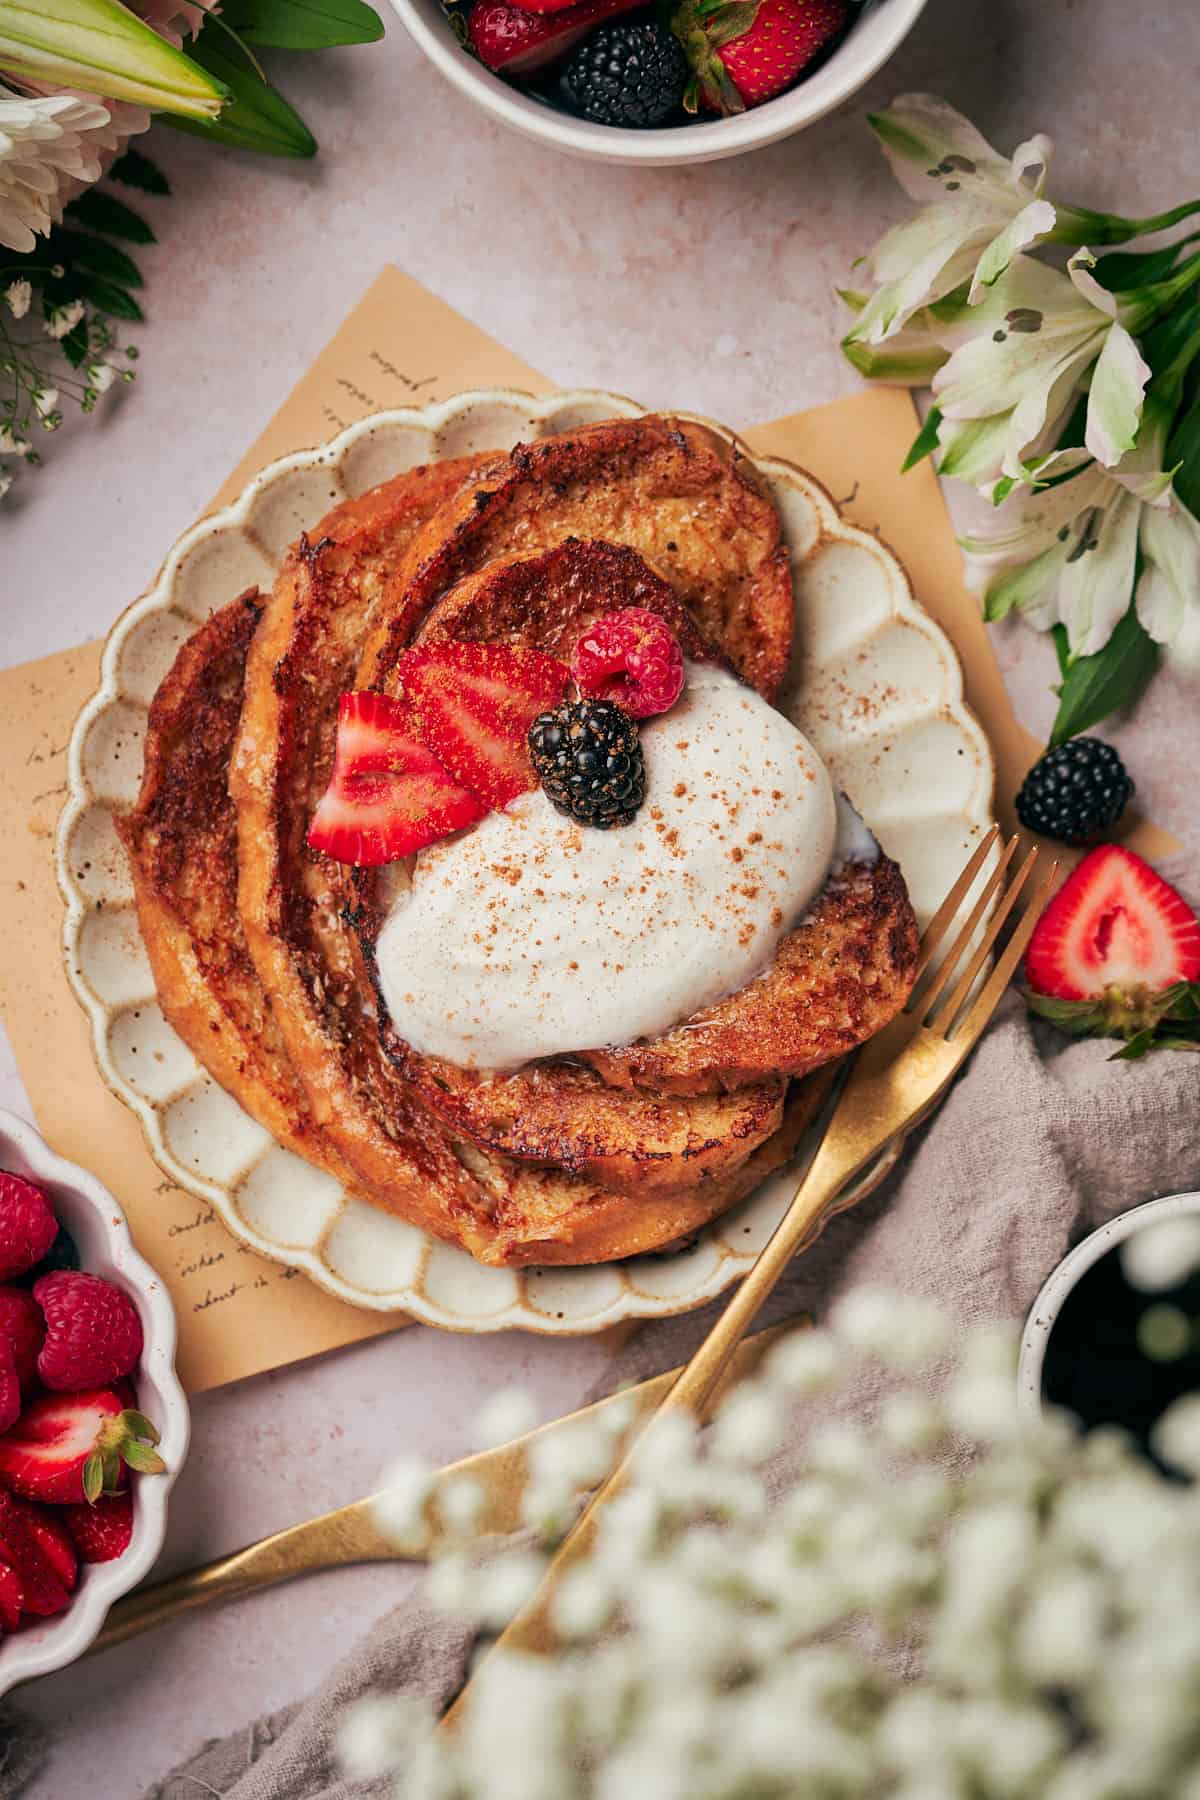 Sourdough french toast with strawberries and blackberries, with a gold fork on a plate with flowers in the background.